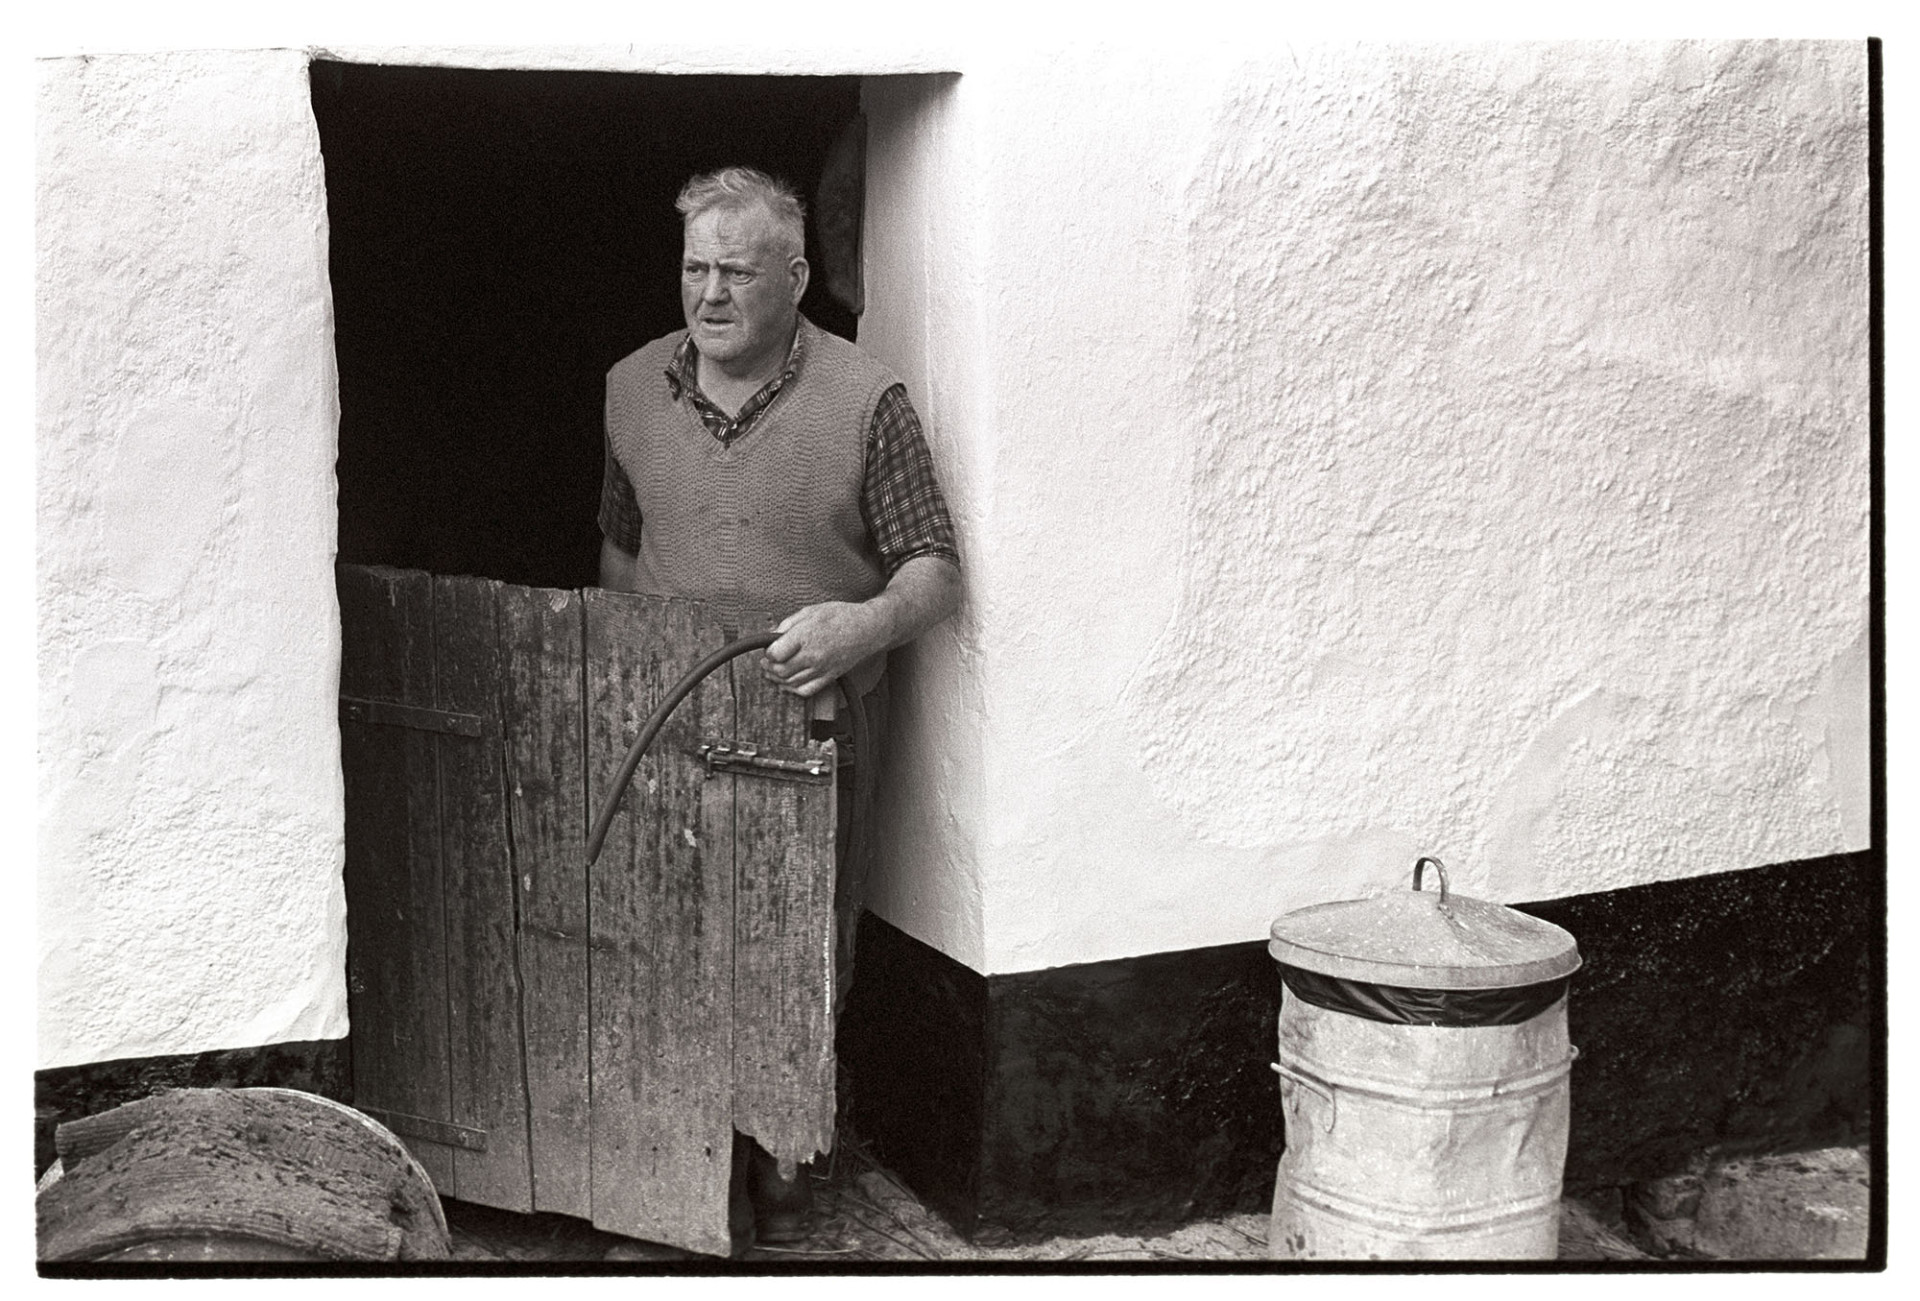 Farmer at doorway to milking shed. 
[Cyril Bennett stood by the wooden doorway of the milking shed or parlour at Cuppers Piece, Beaford.]